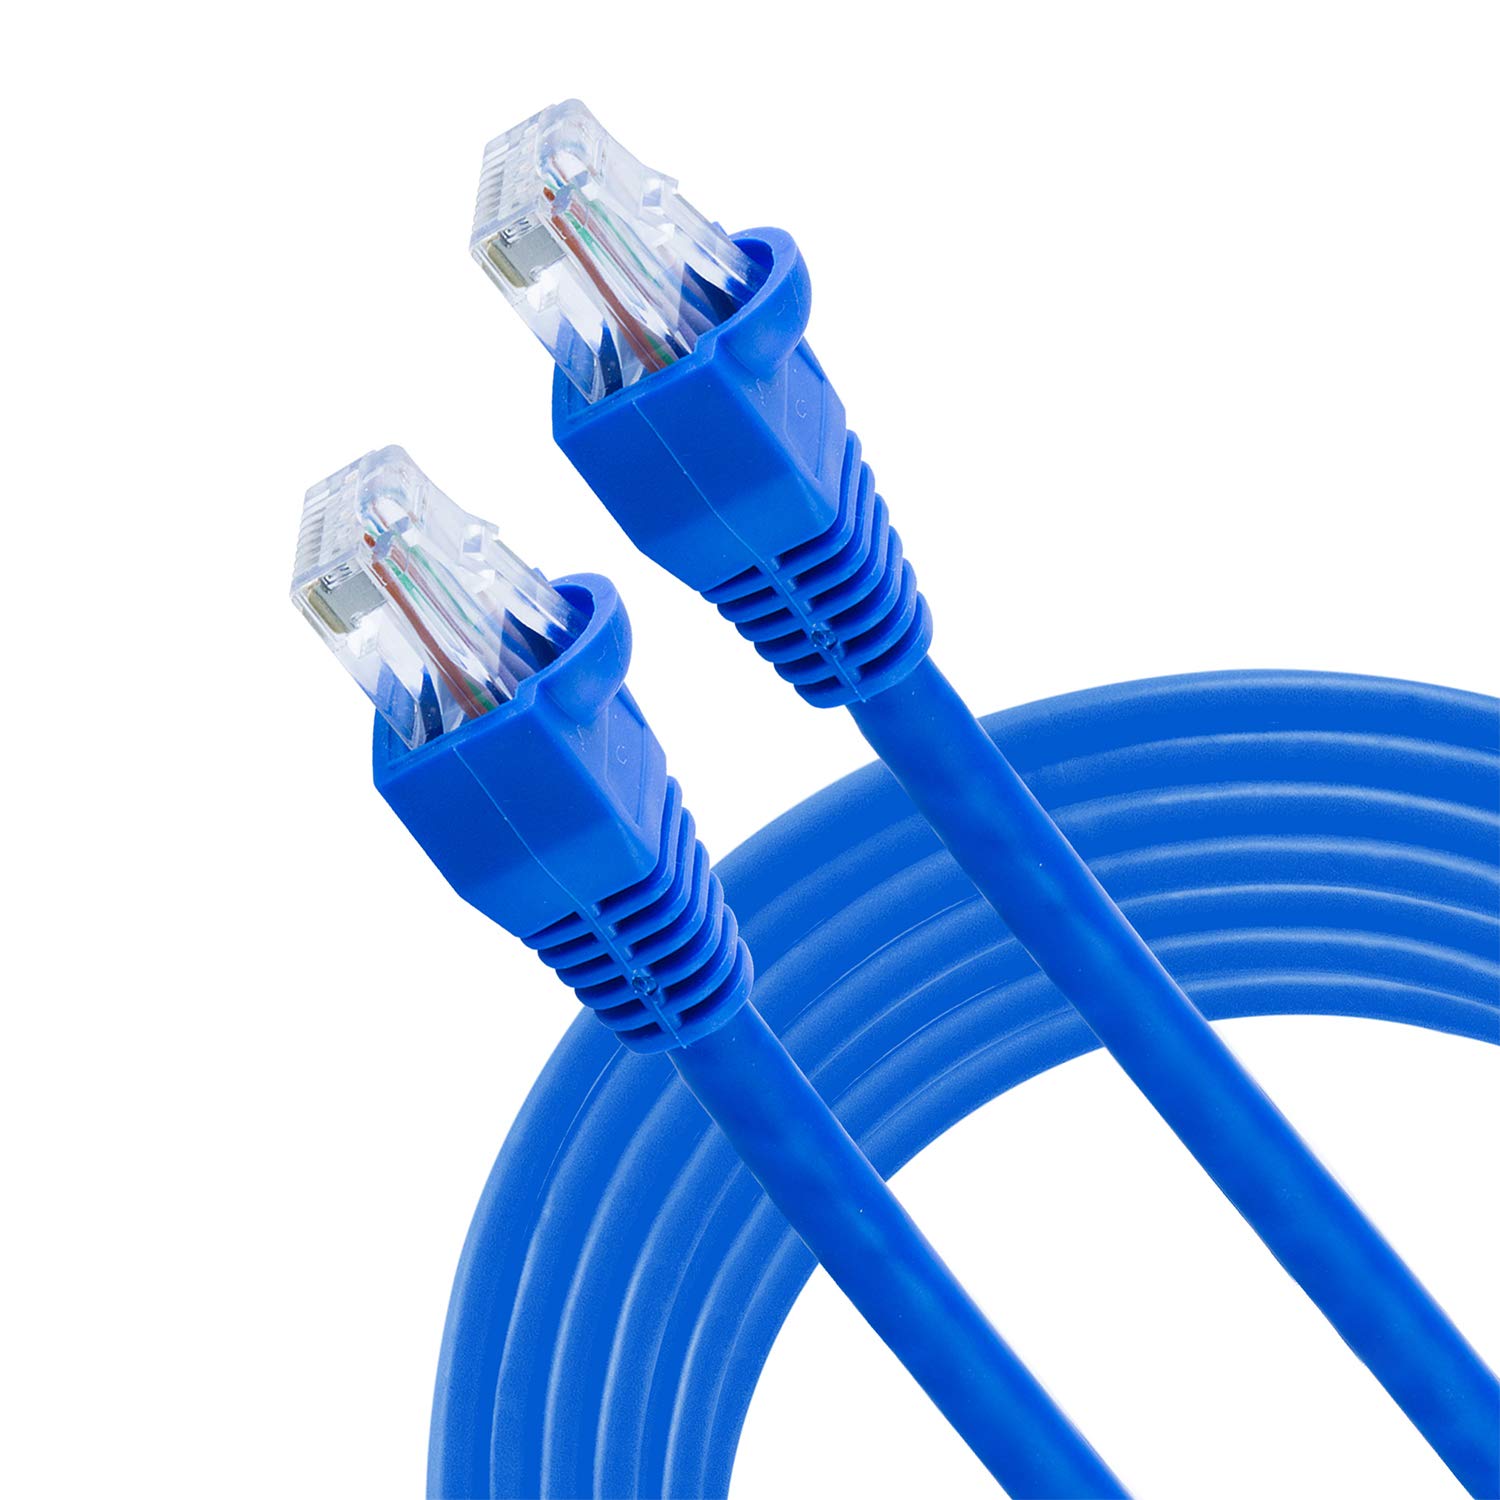 GE Cat6 Ethernet Cable, 14ft Ethernet Cable, Up to [...]